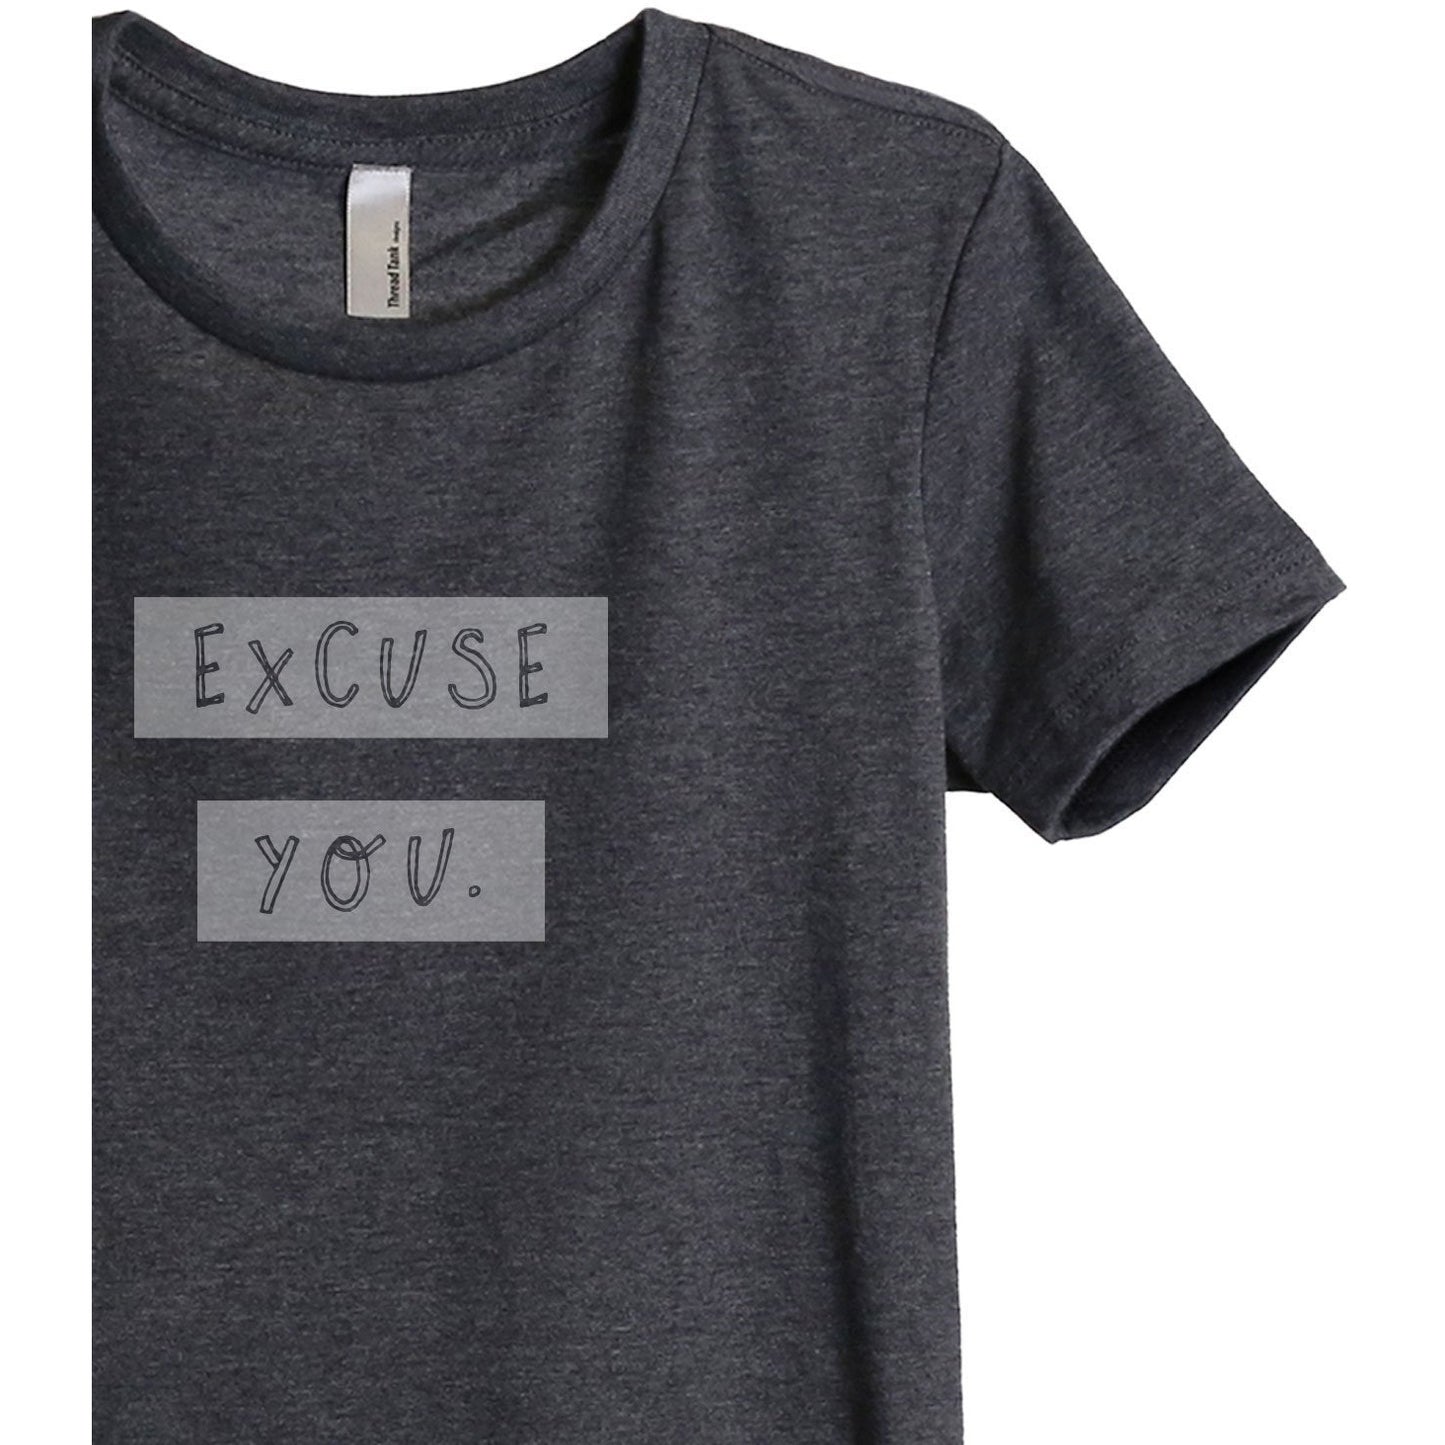 Excuse You Women's Relaxed Crewneck T-Shirt Top Tee Charcoal Grey Zoom Details